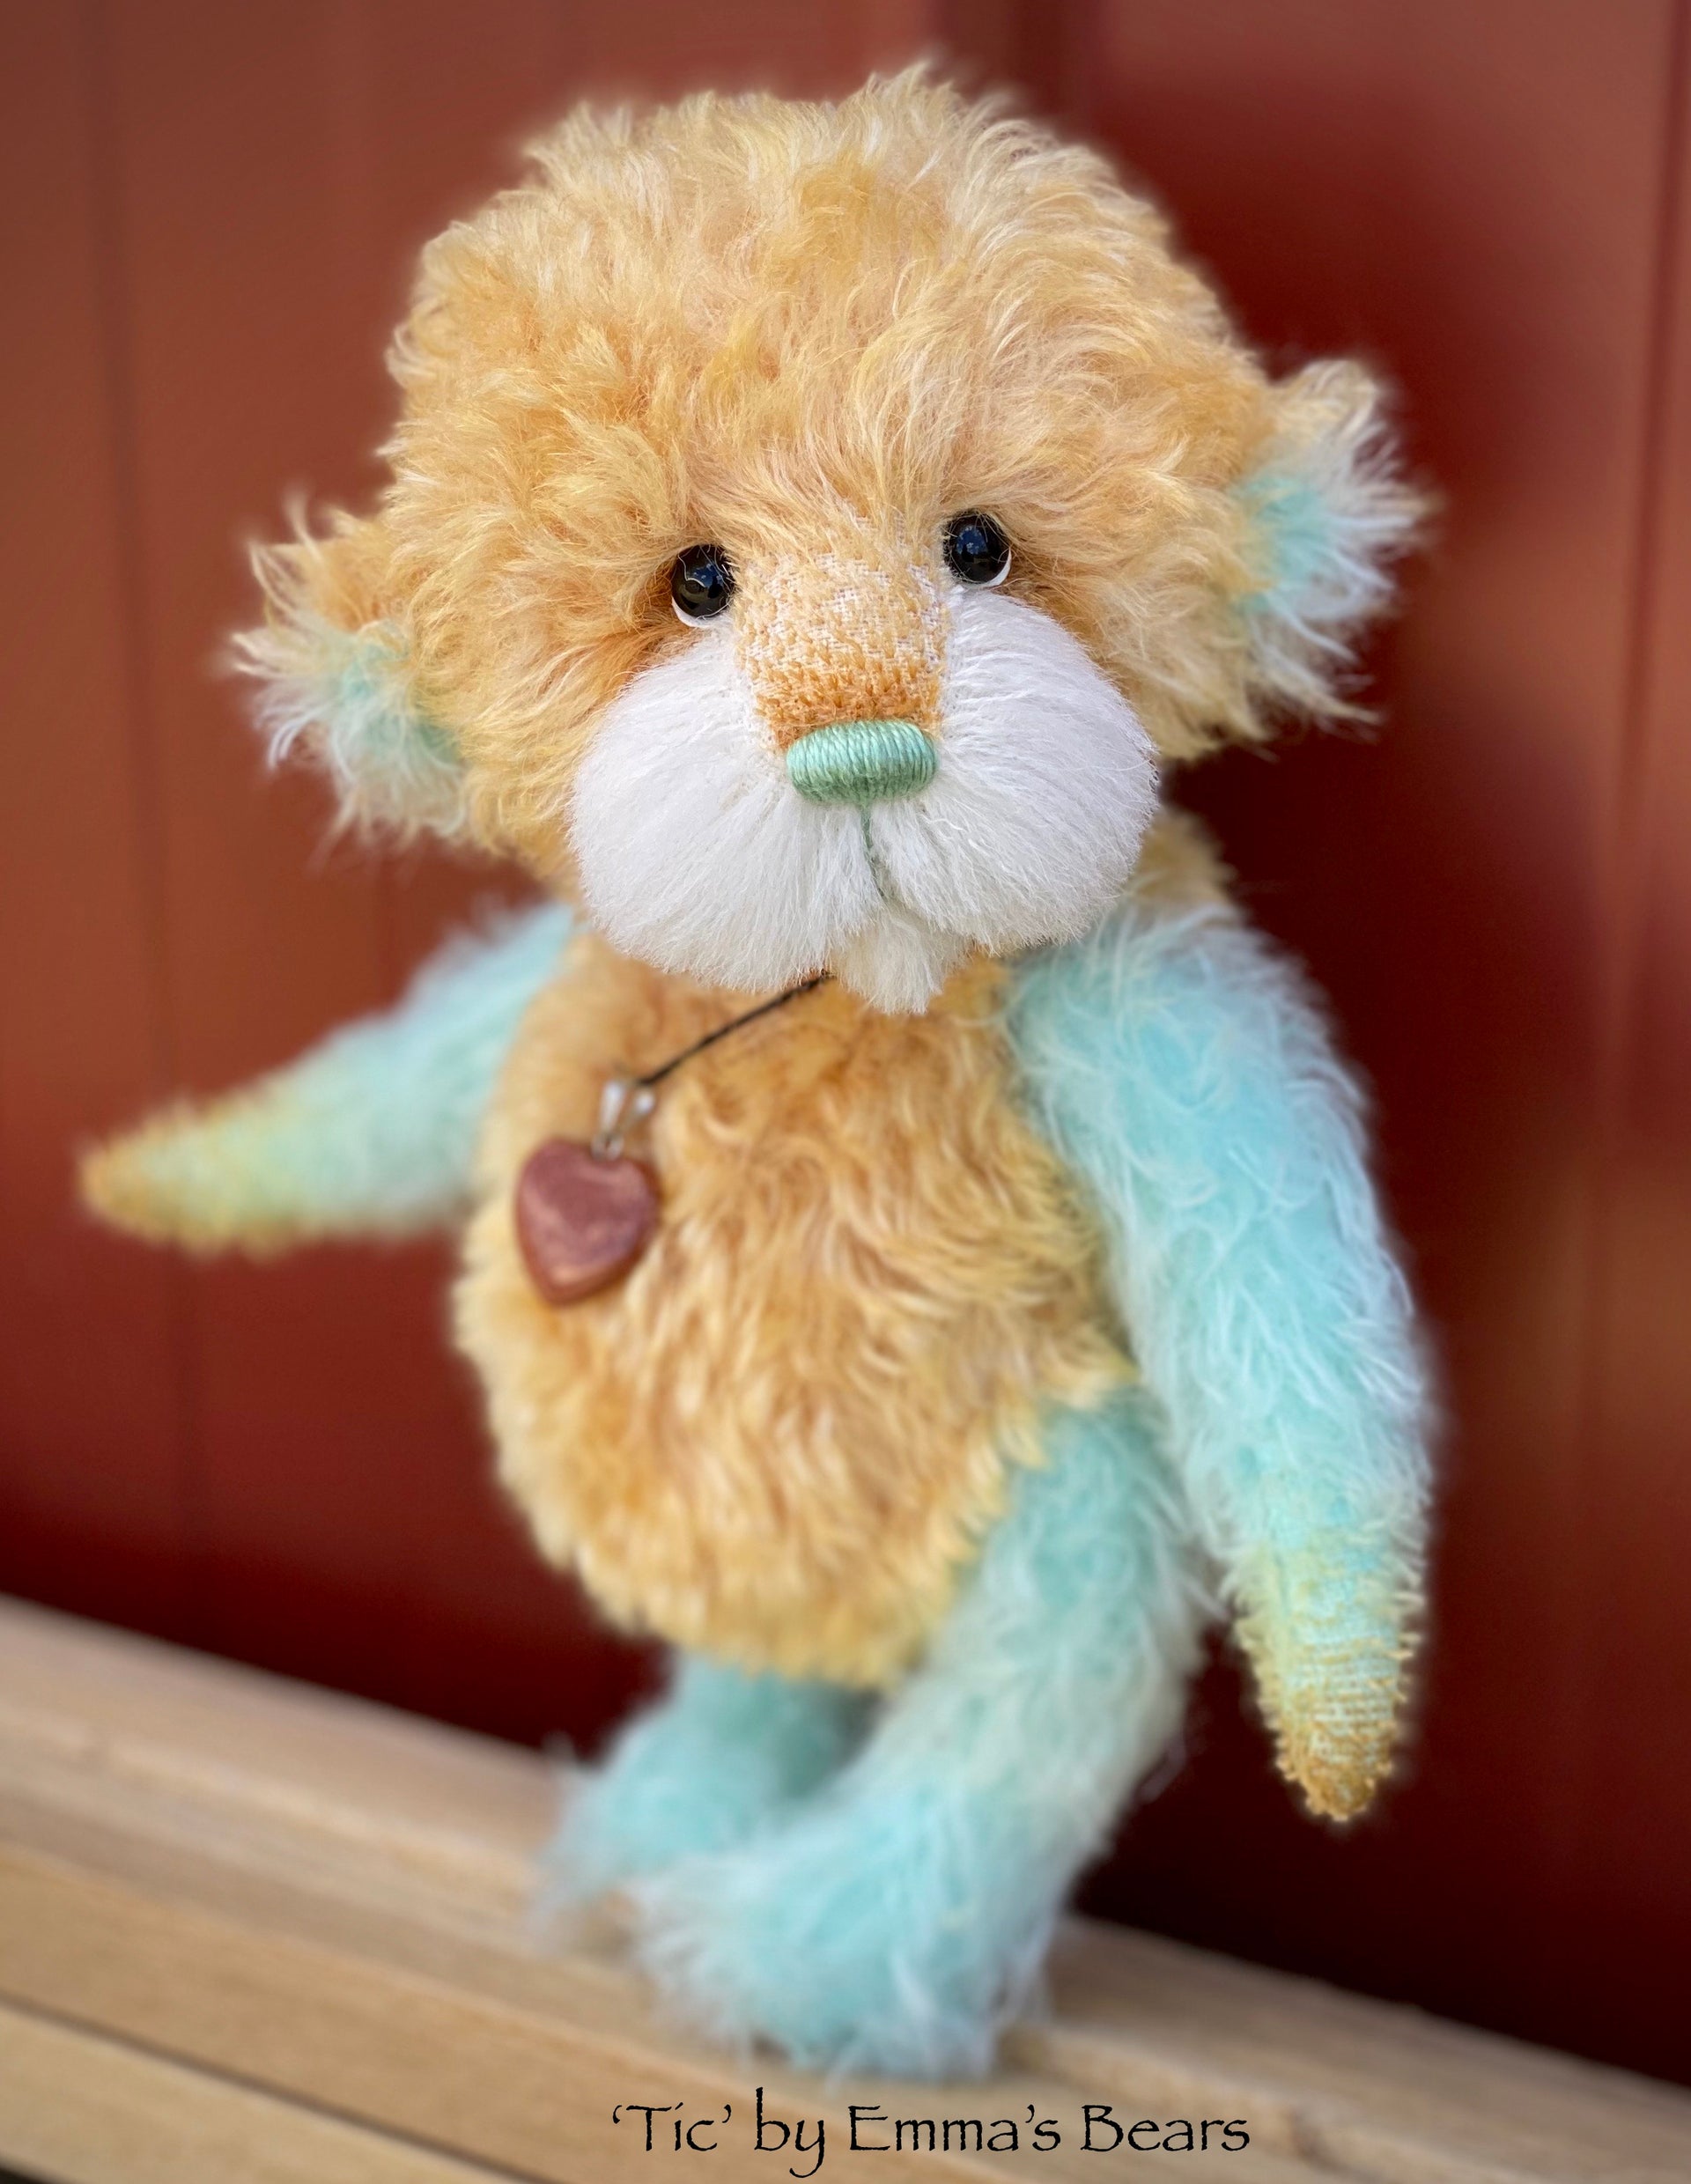 Tic - 8" Hand-Dyed Mohair and Alpaca Artist Bear by Emma's Bears - OOAK in a Limited Series